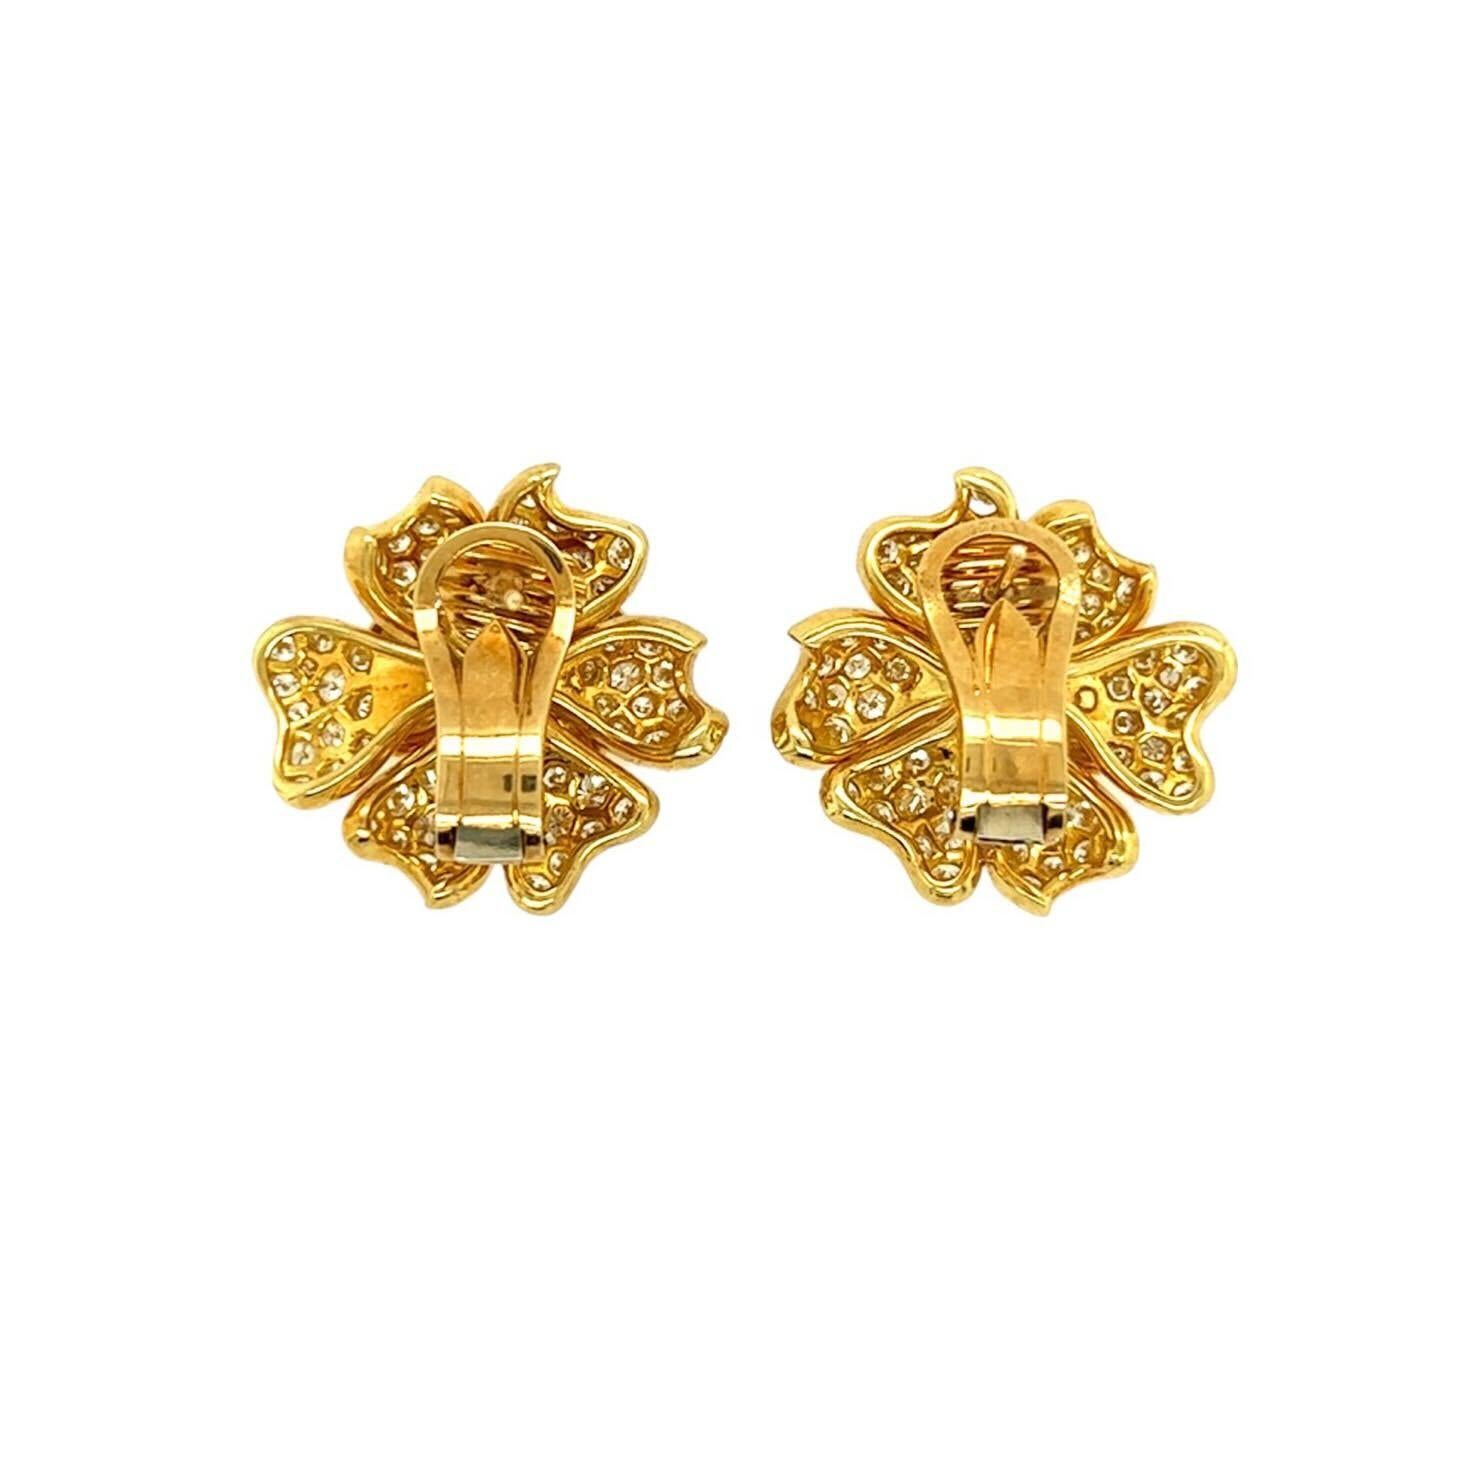 Round Cut Pair of Yellow Gold and Diamond Flower Earrings